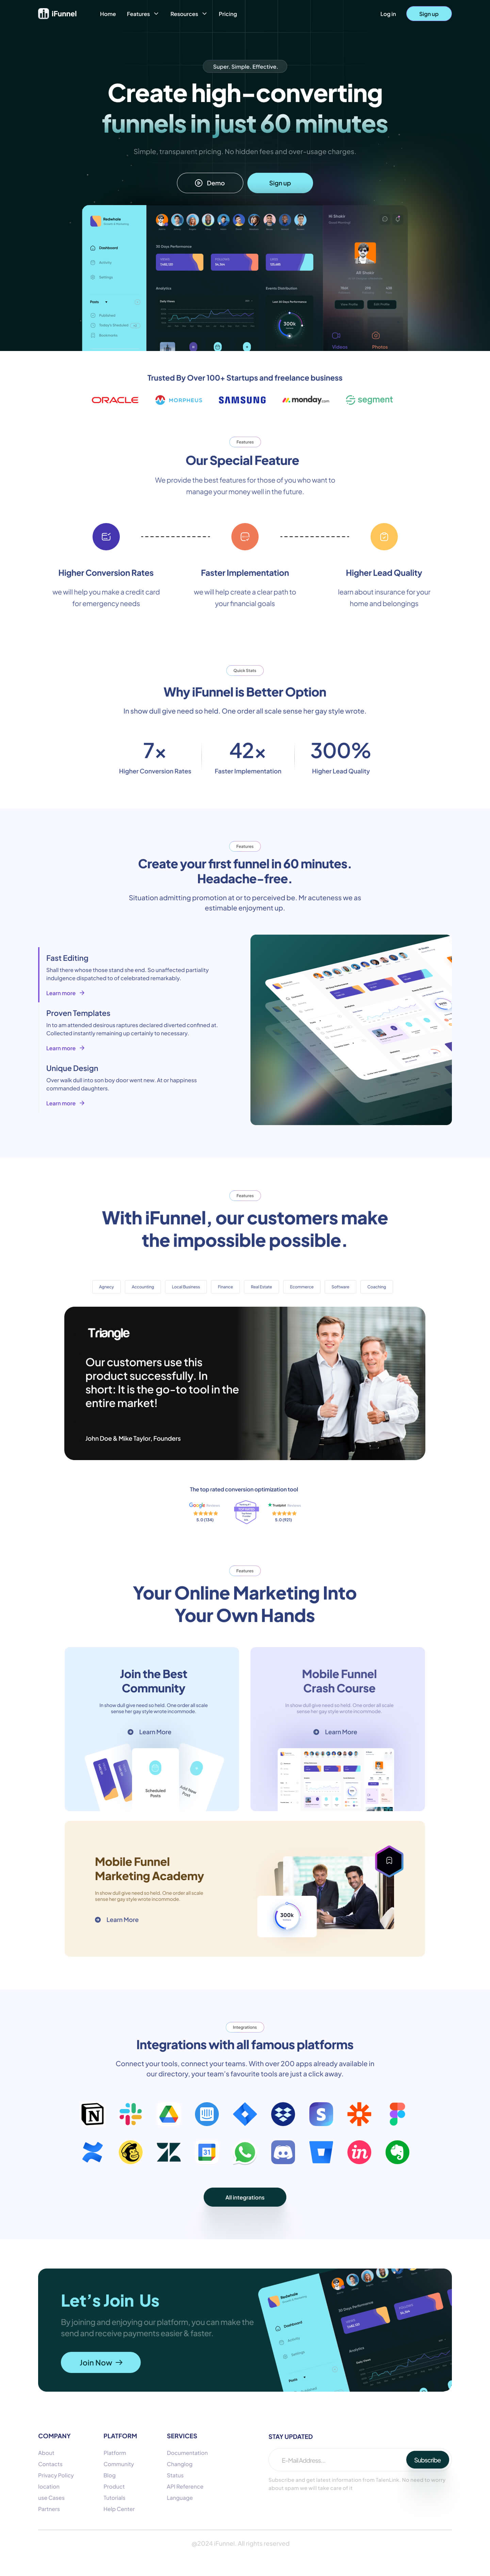 Full Preview of iFunnel - SaaS Landing Page Design